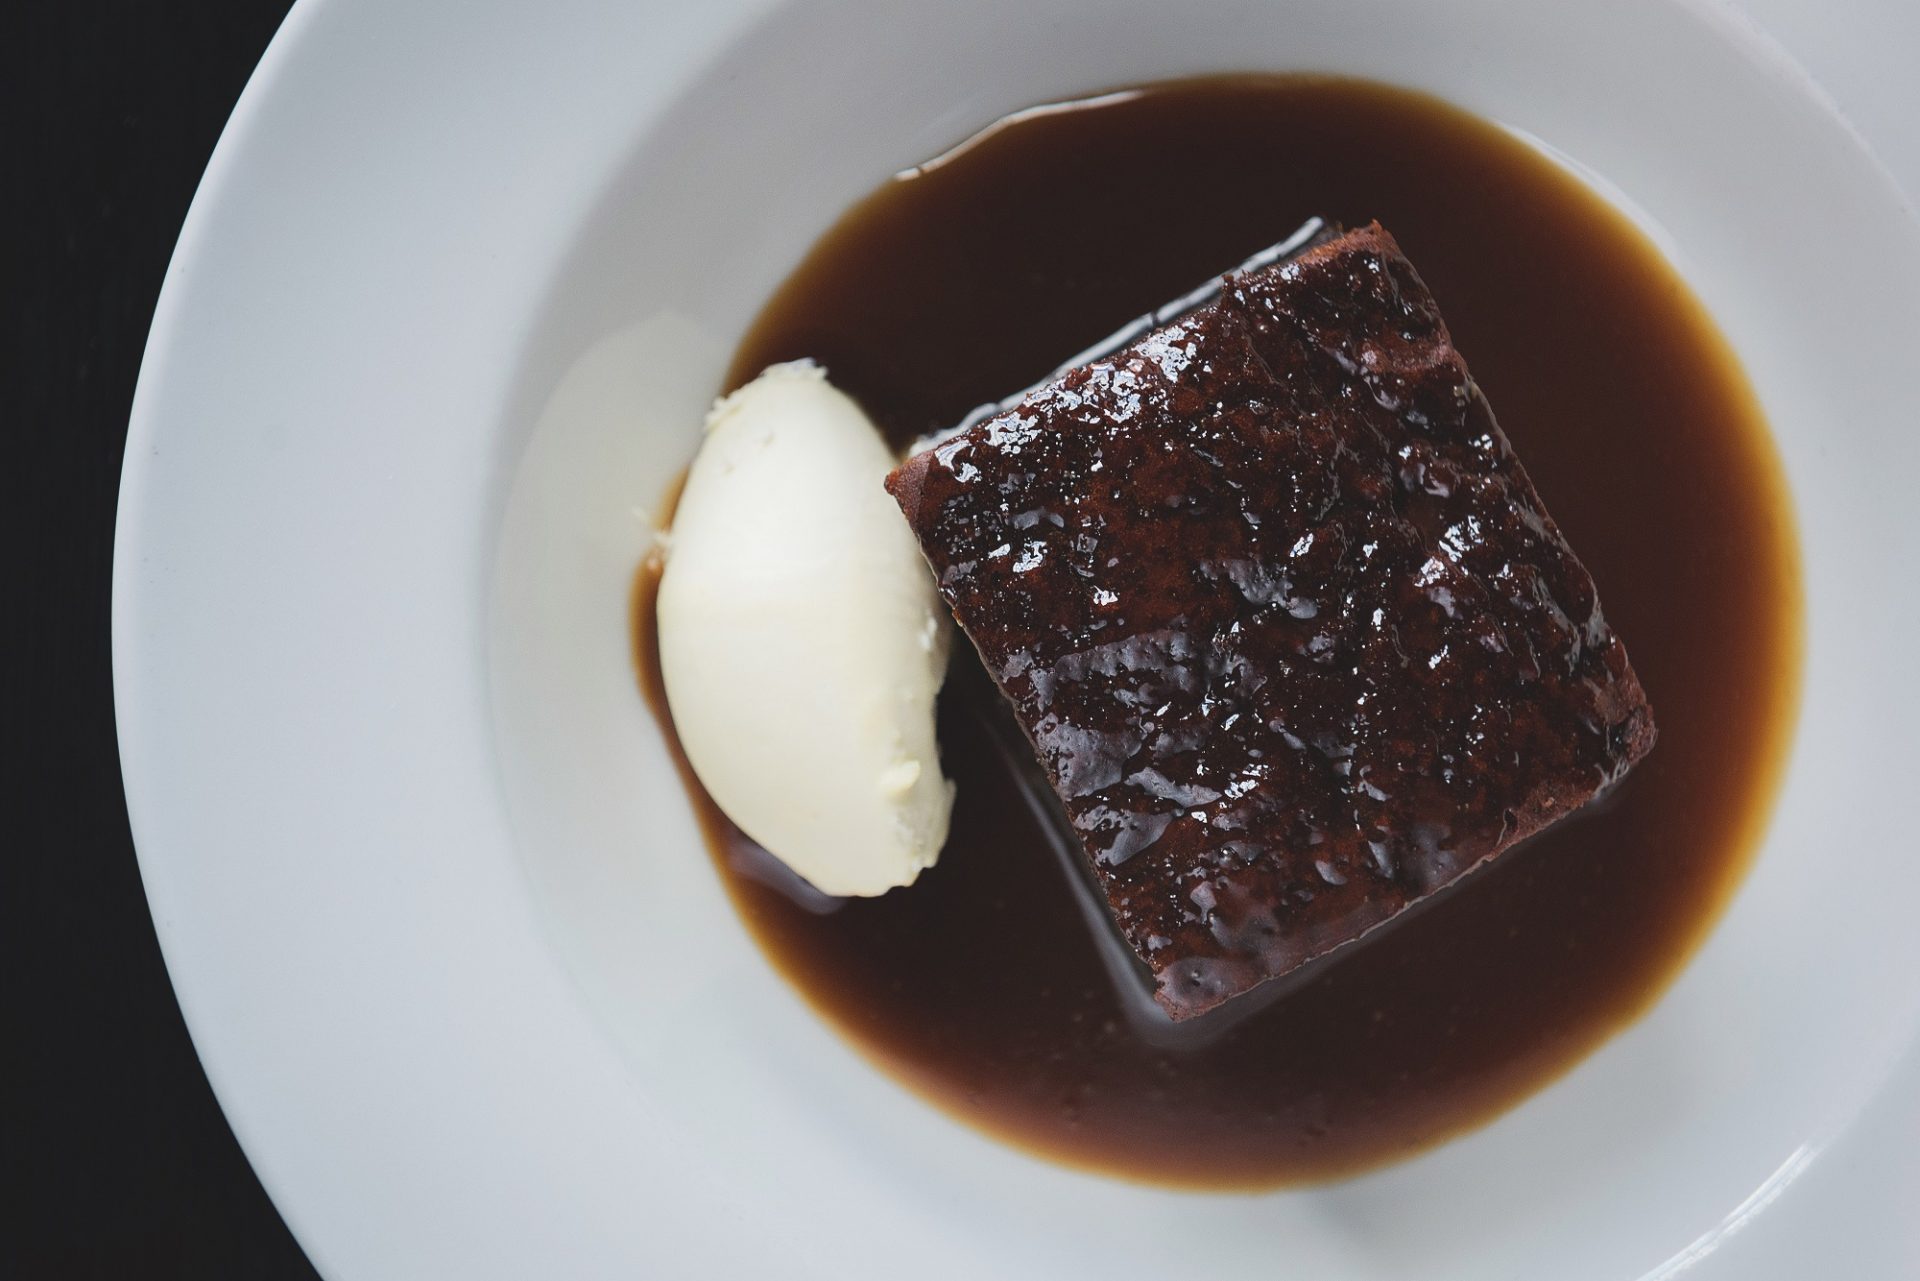 Stein's at Home - Sticky toffee pudding